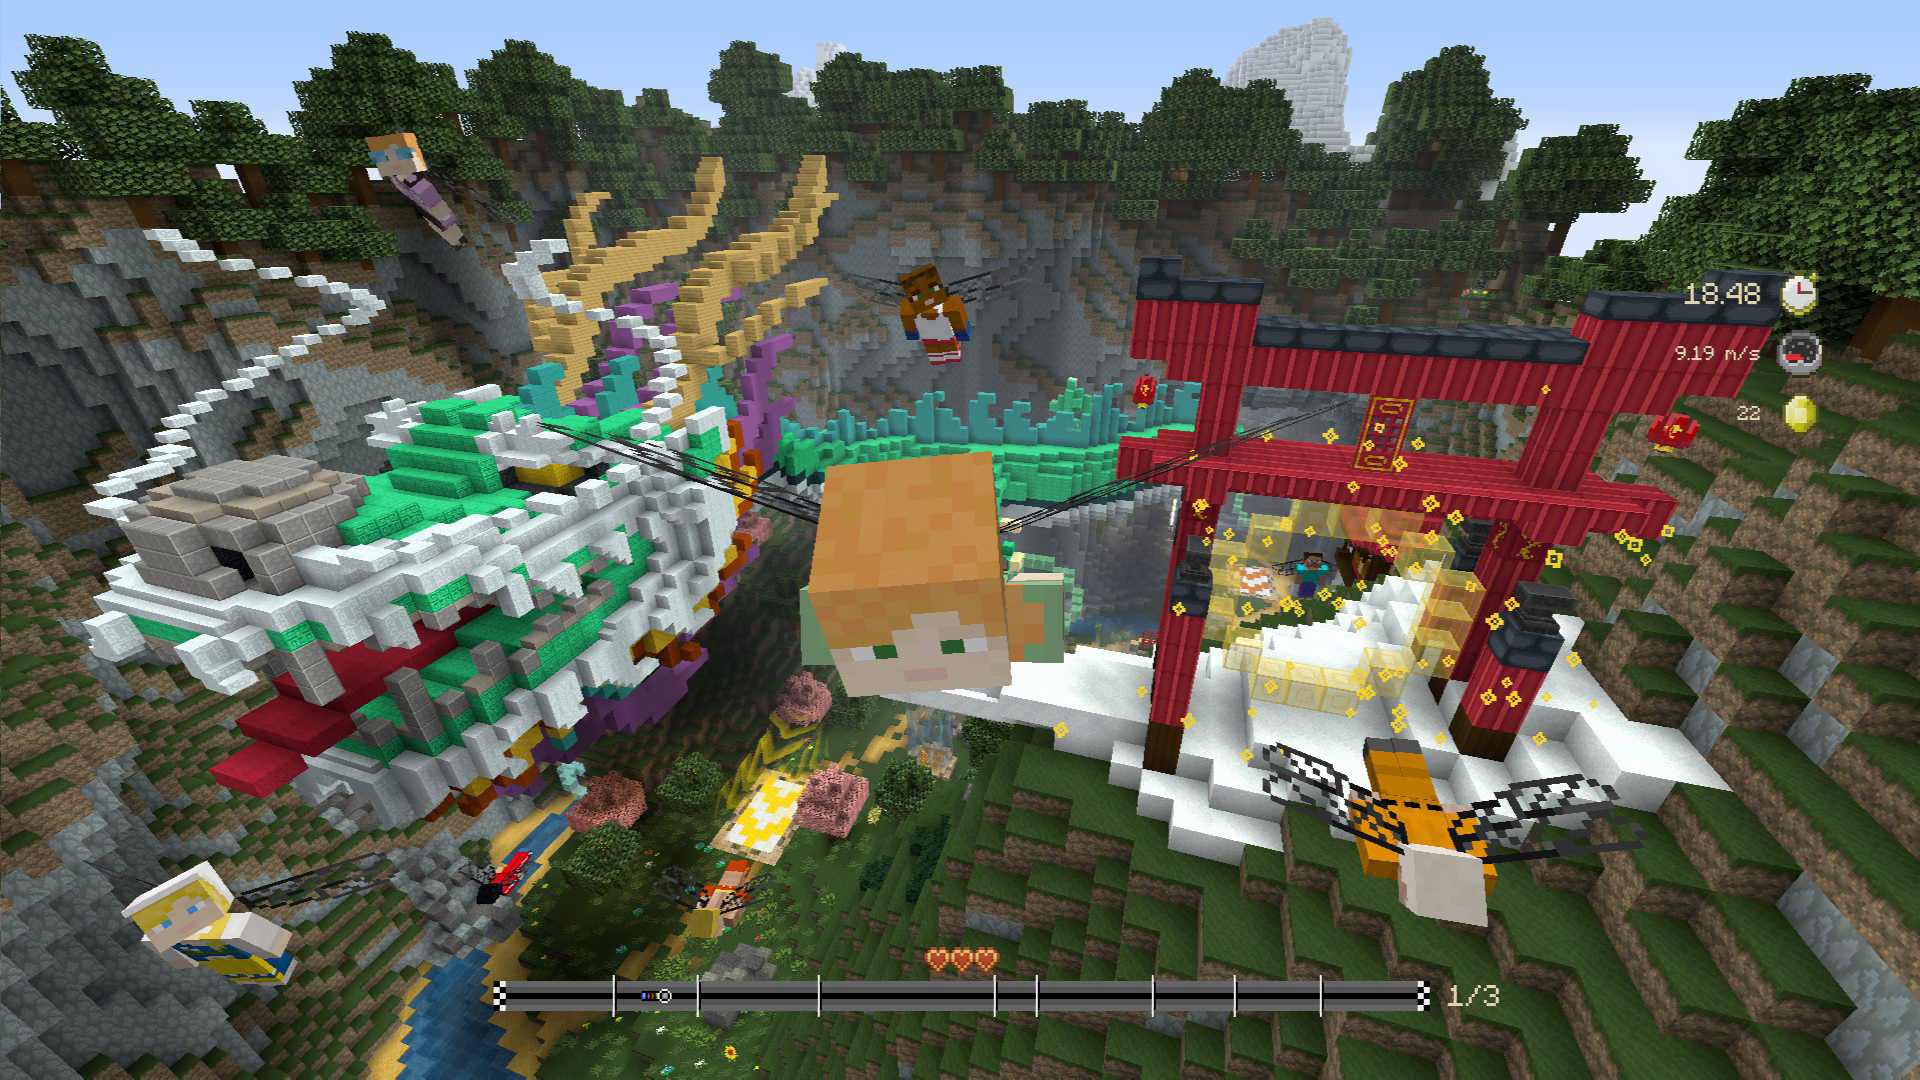 Minecraft Patch 1.47 for PS4 and PS3 released with Glide Beasts Track Pack